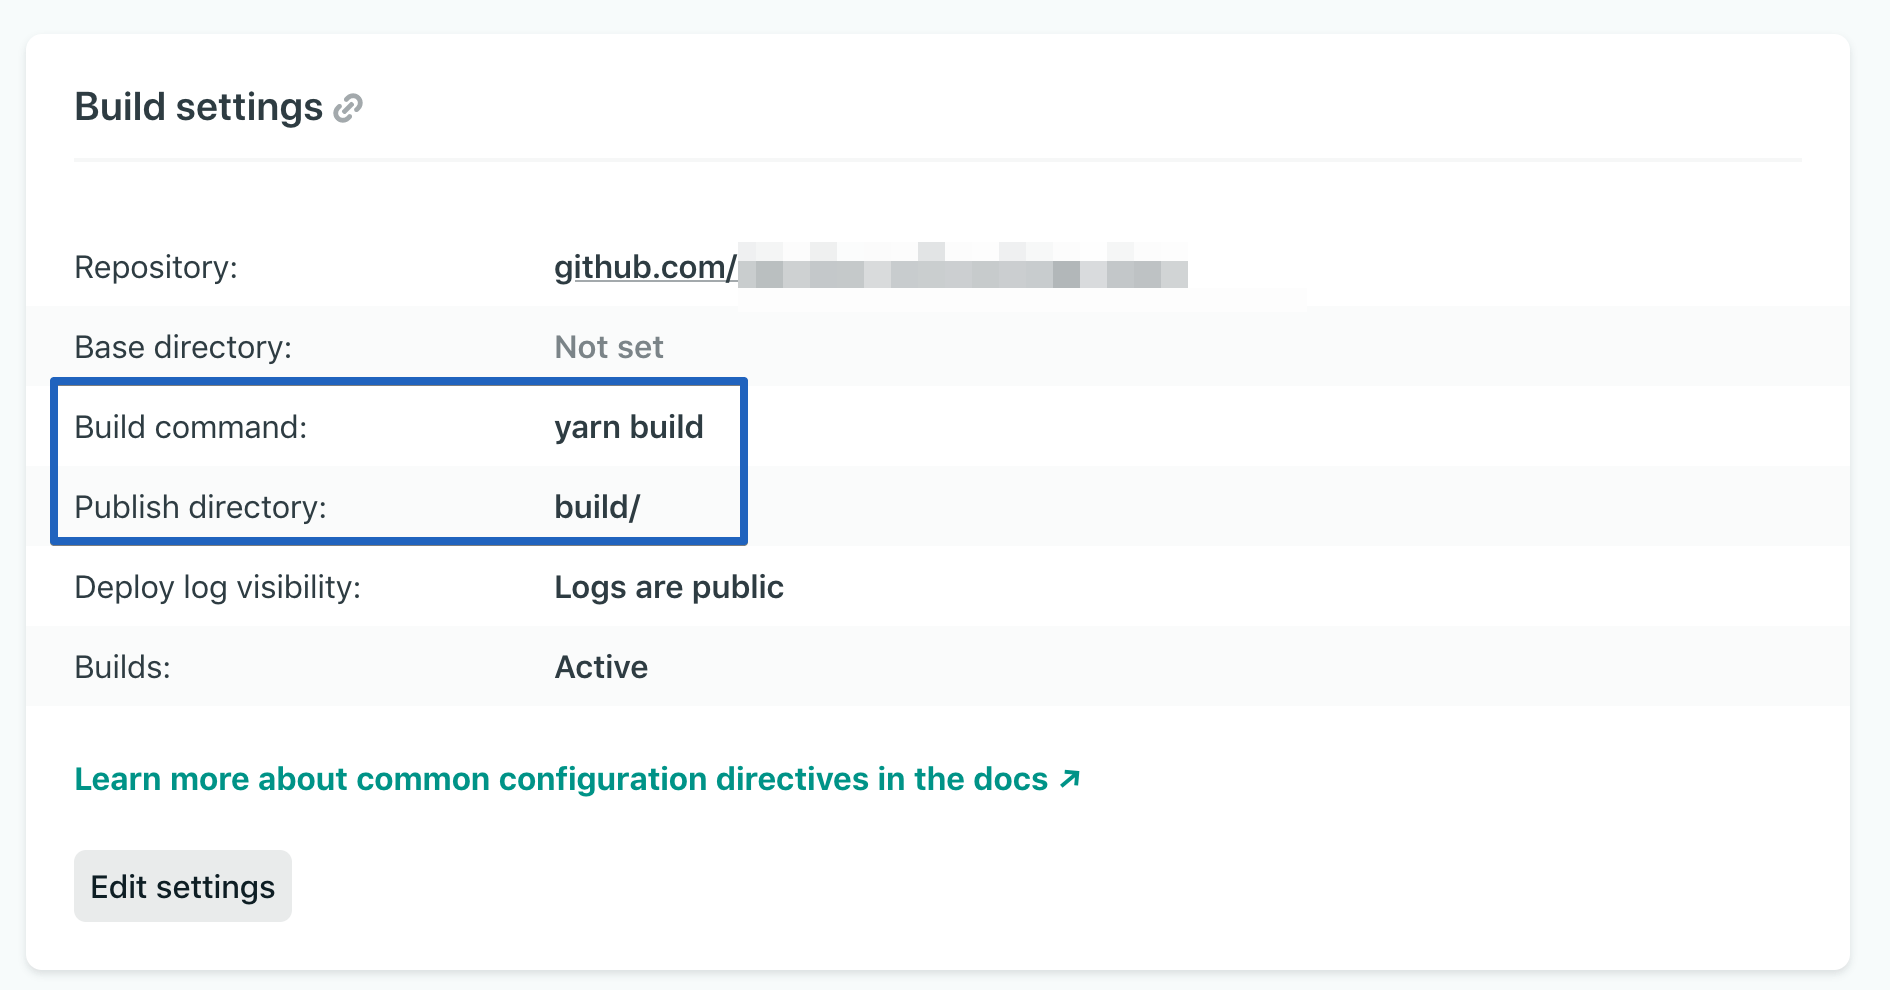 Finding the “Build command” and “Publish directory” fields